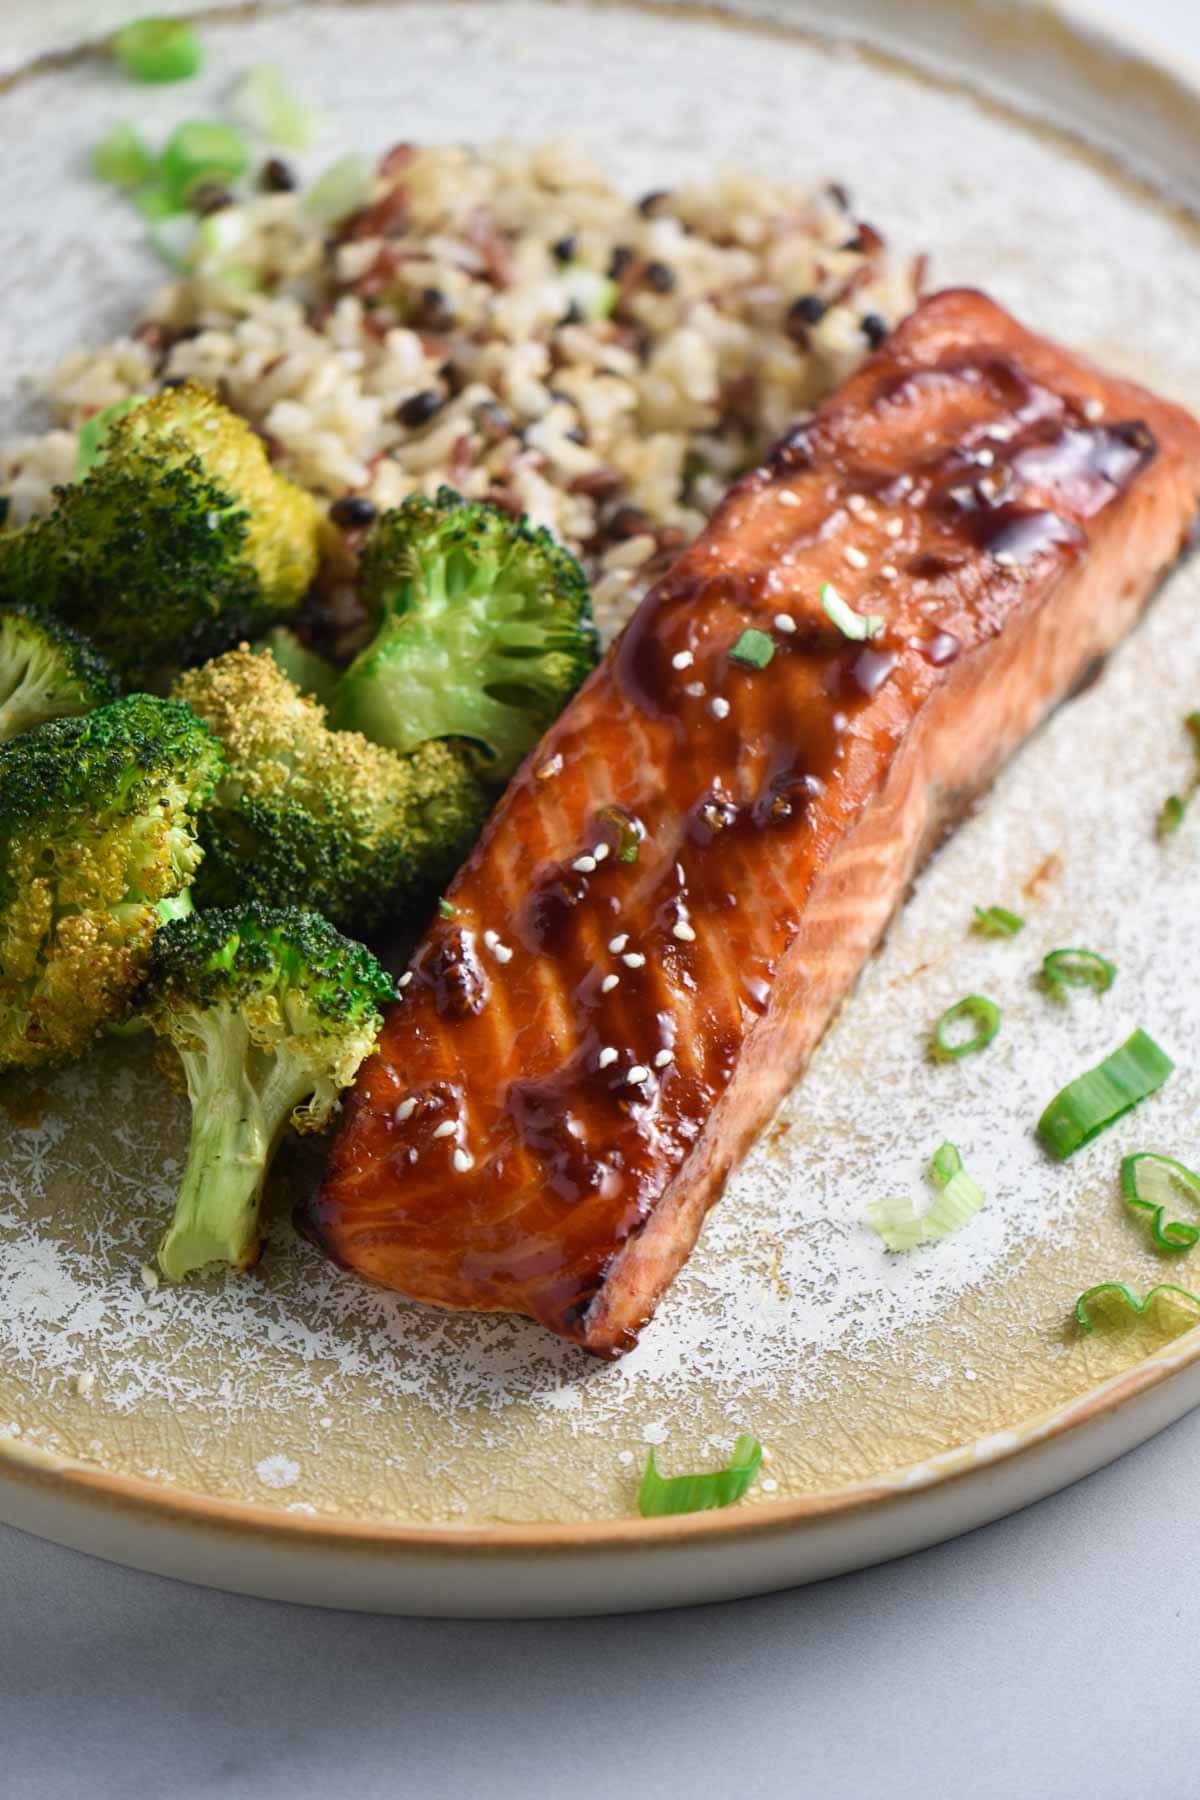 Air fried teriyaki salmon topped with a glaze and sprinkled with sesame seeds next to steamed broccoli and rice.